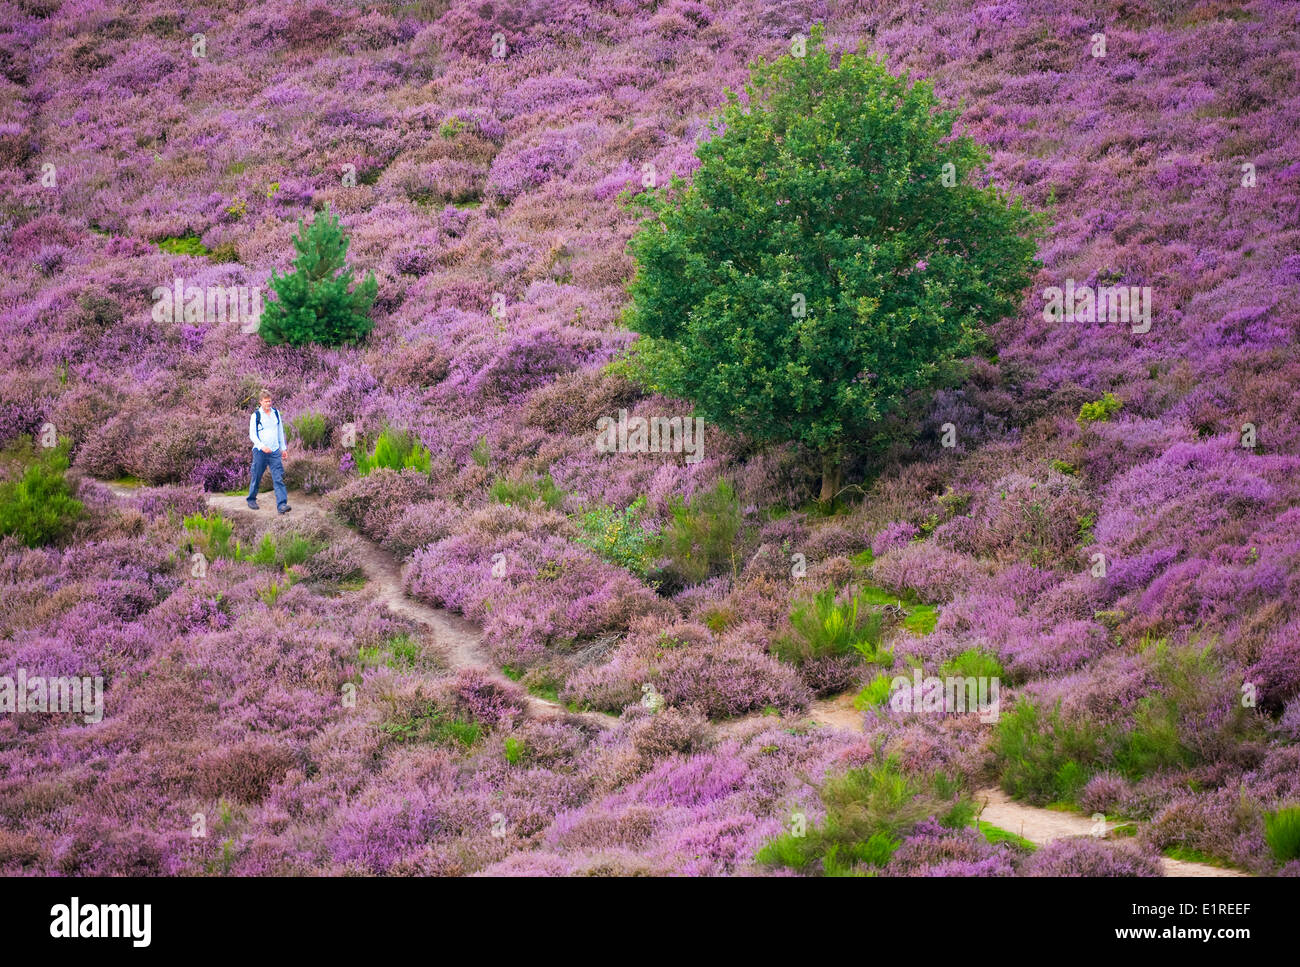 people walking in a flowering heather in late summer Stock Photo